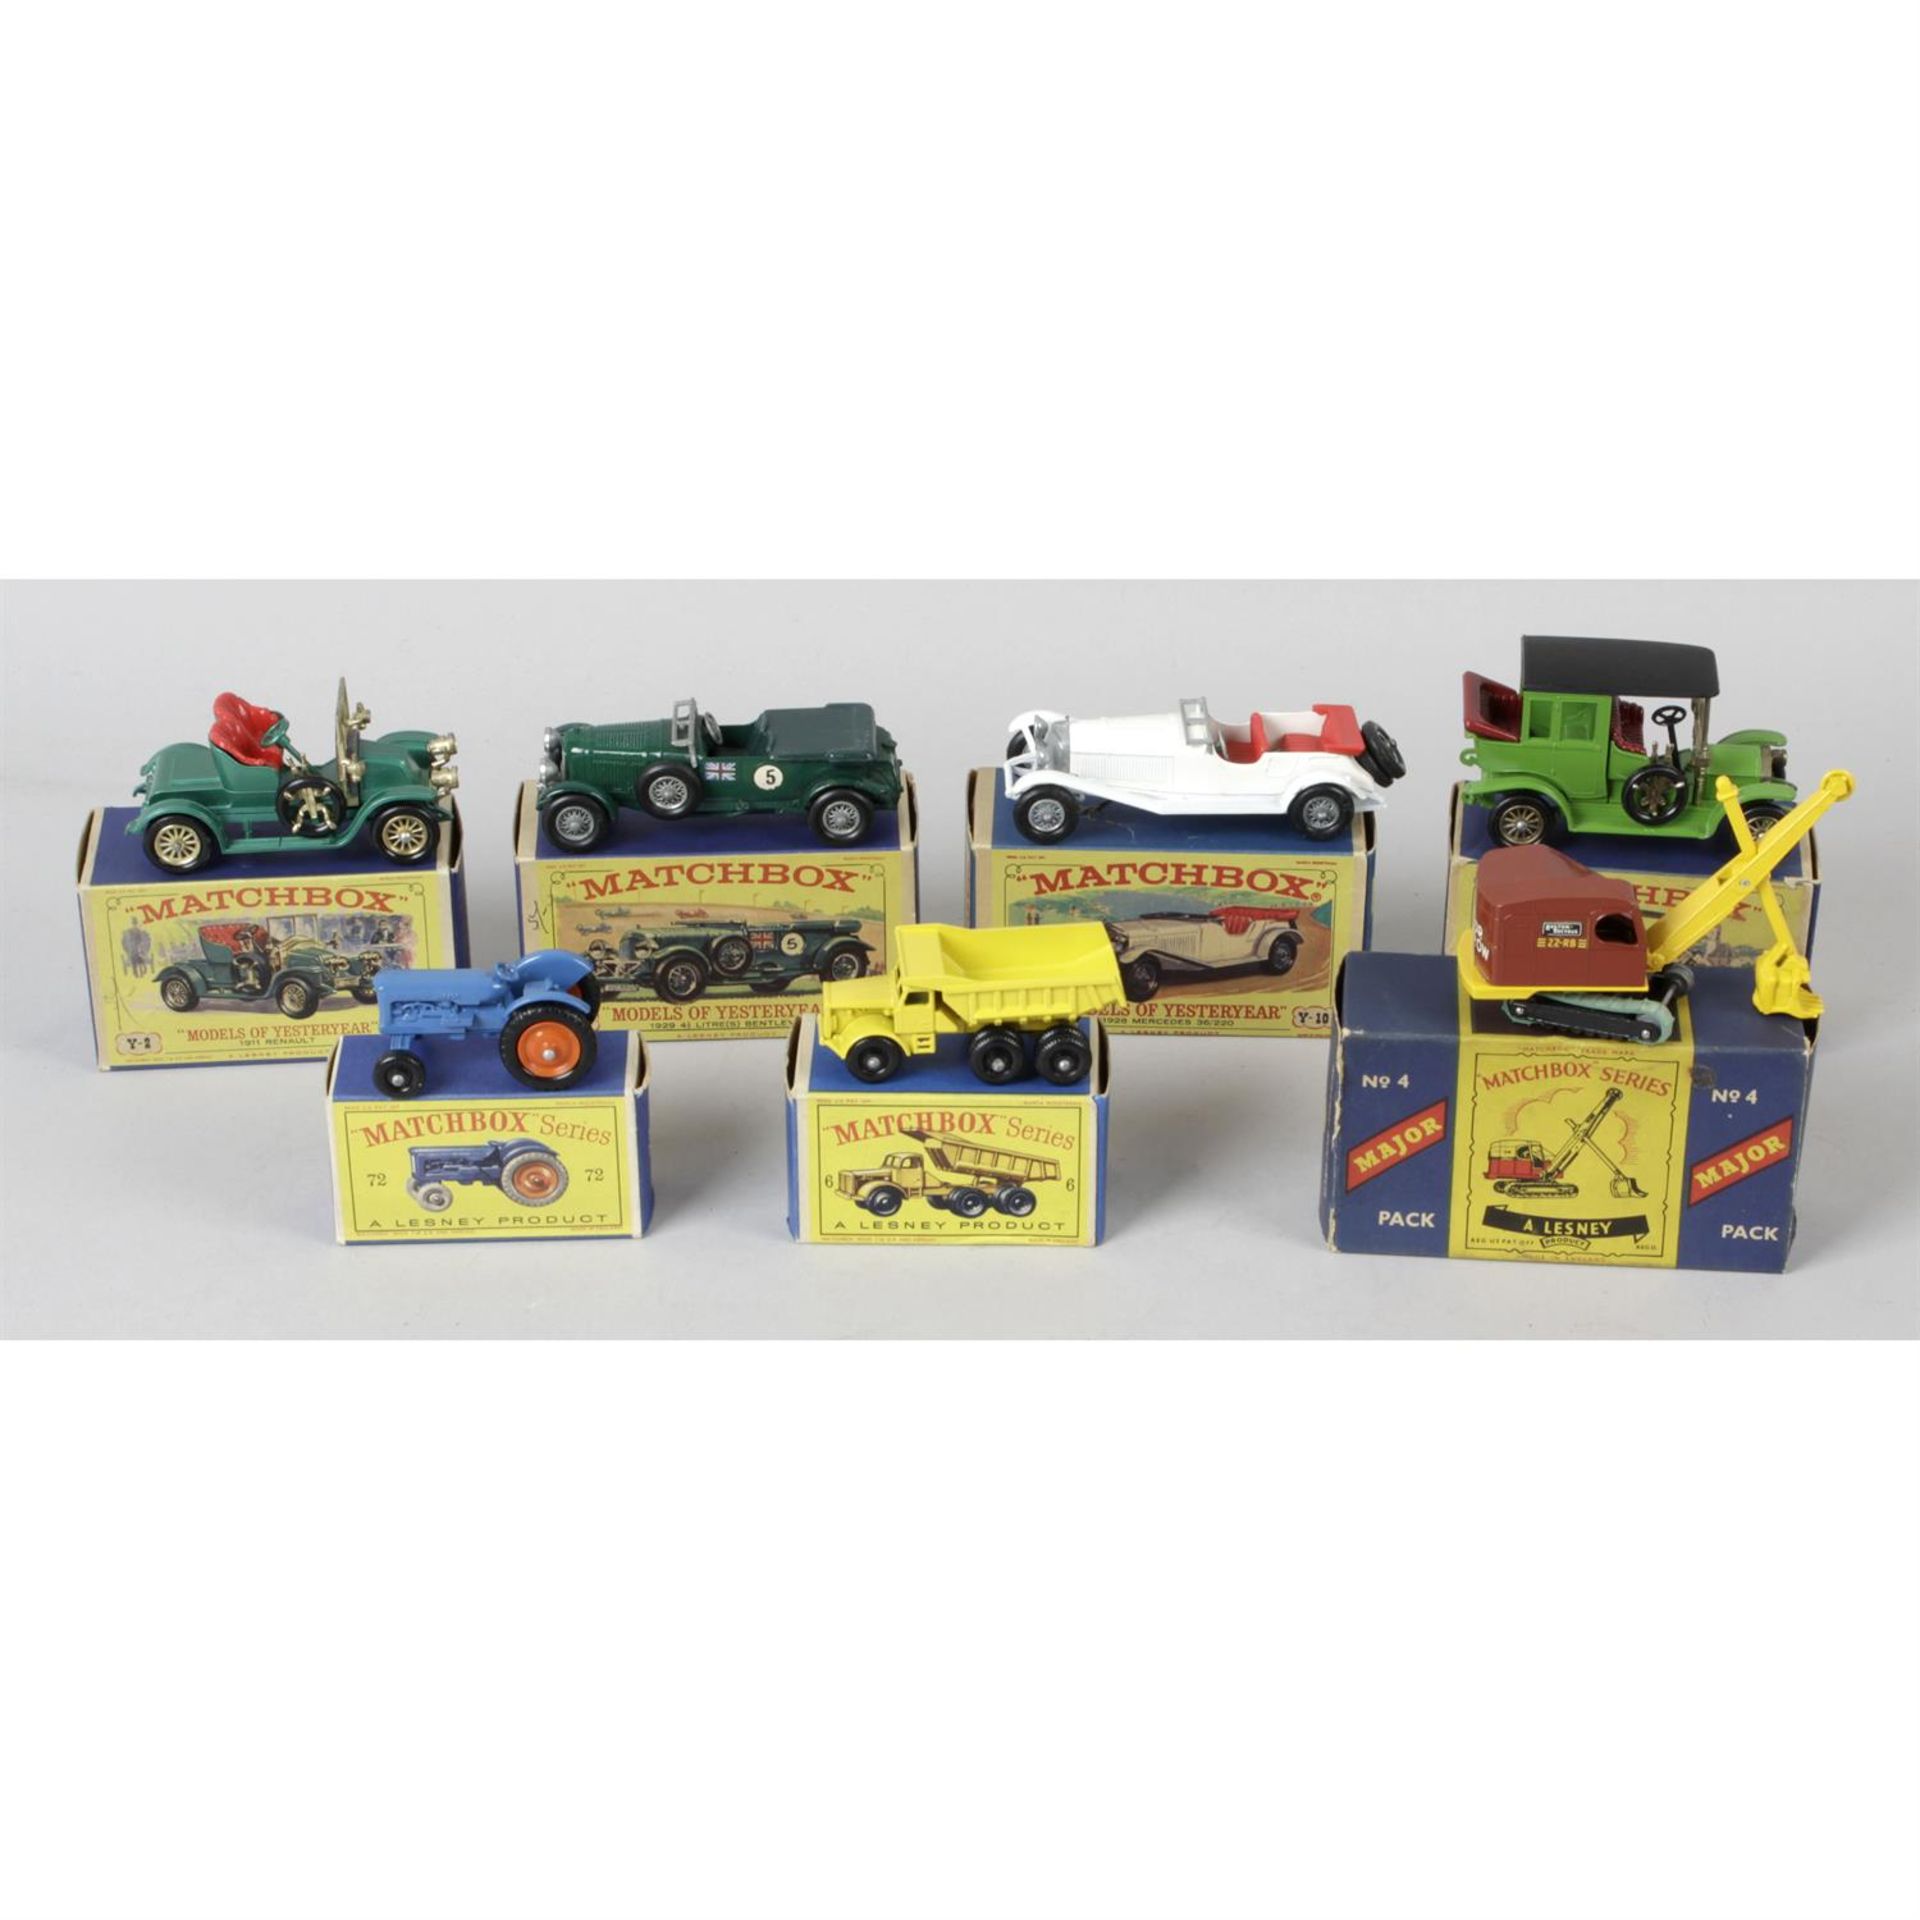 A collection of seven assorted matchbox Diecast model vehicles